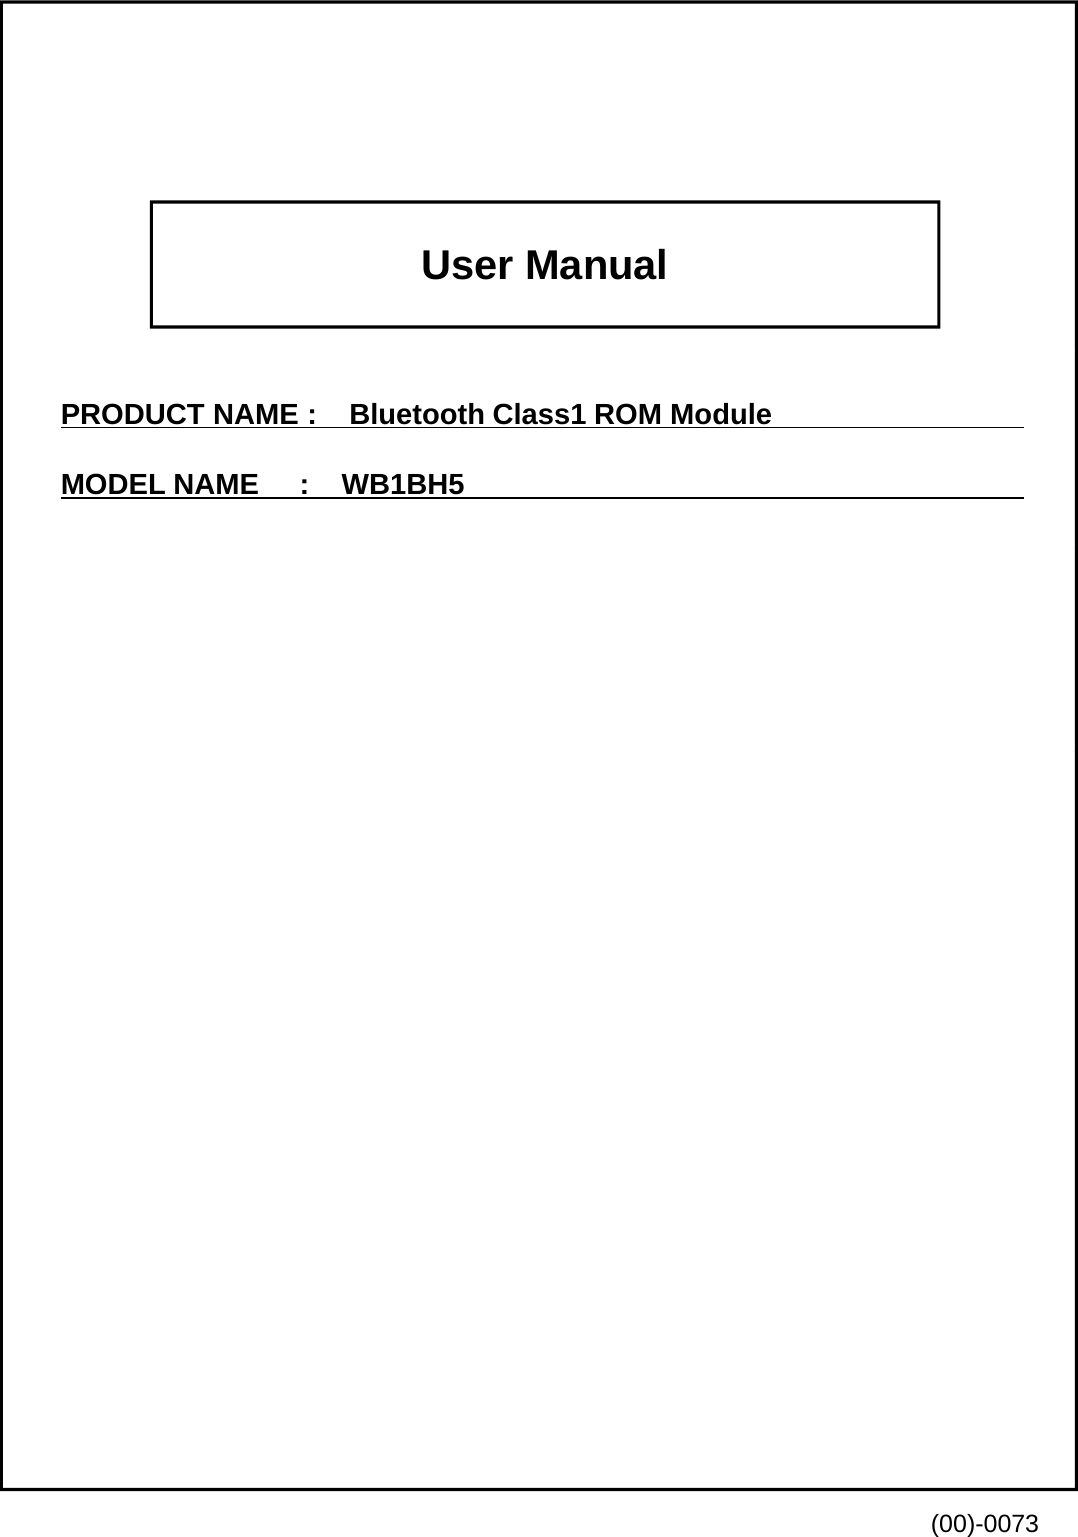 User ManualPRODUCT NAME :    Bluetooth Class1 ROM ModuleMODEL NAME     :    WB1BH5(00)-0073